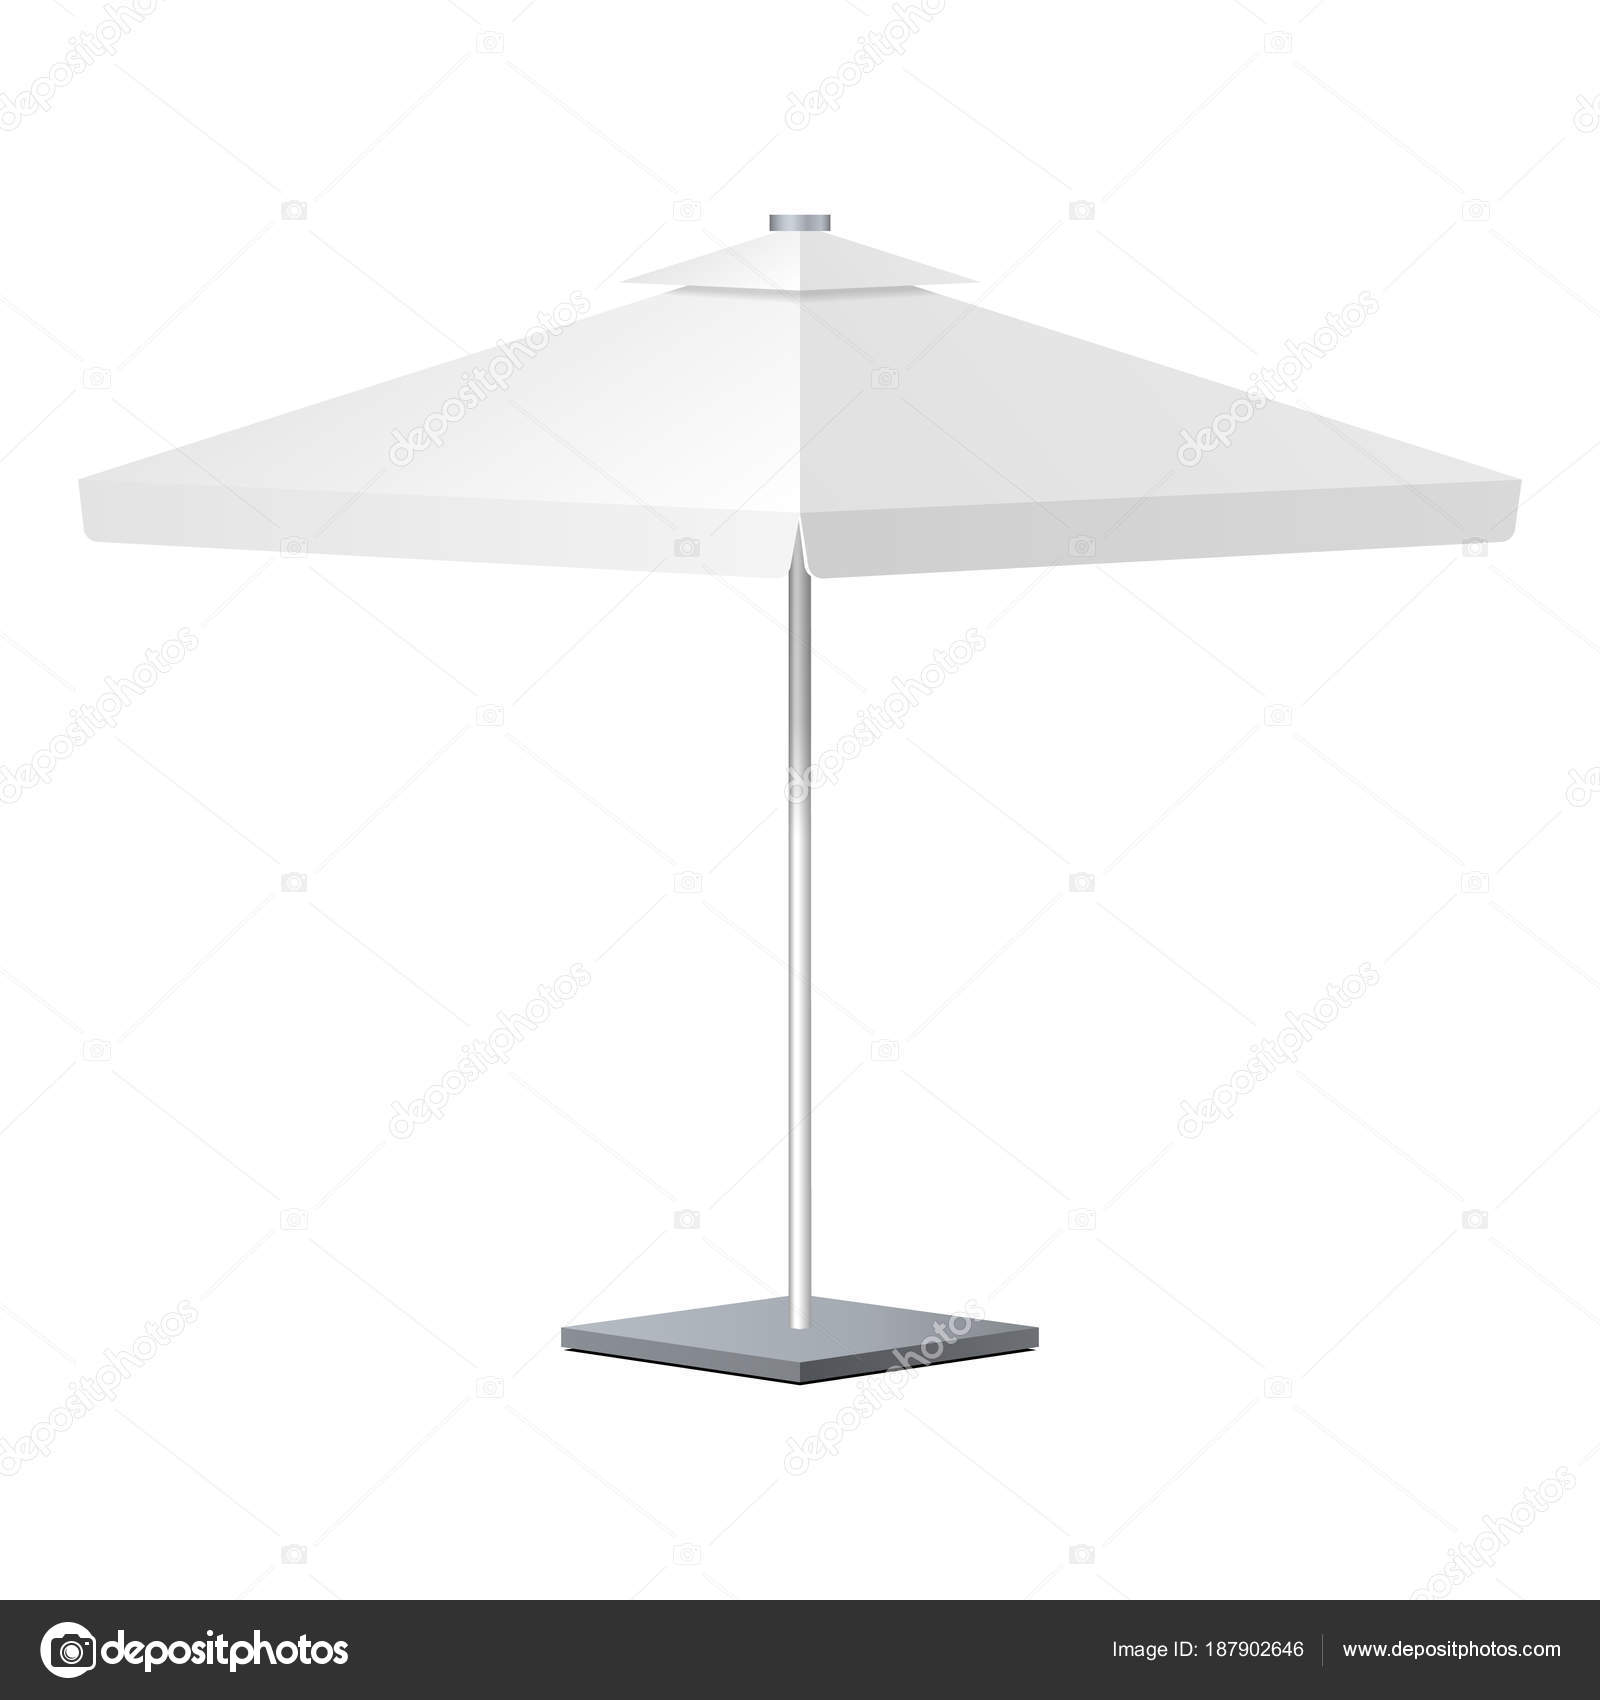 Download Promotional Square Advertising Outdoor Garden White Umbrella Parasol Mock Up Template Illustration Isolated On White Background Ready For Your Design Product Advertising Vector Eps10 Vector Image By C Semenchenko Vector Stock 187902646